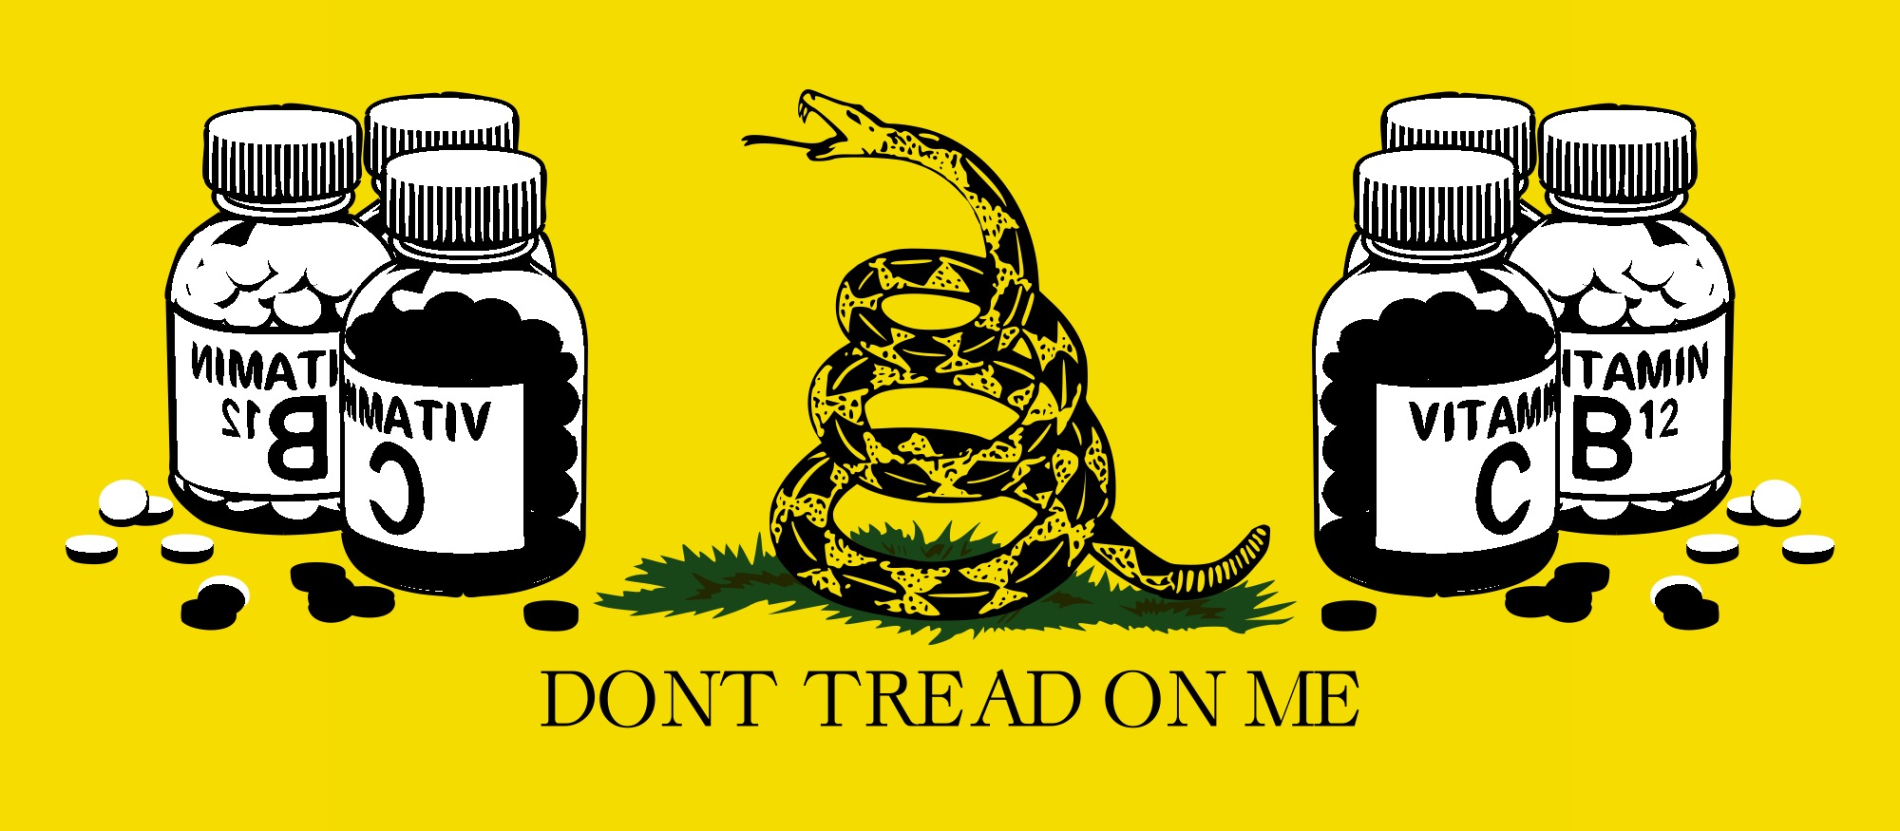 libertarian "don't tread on me" flag and bottles of vitamins